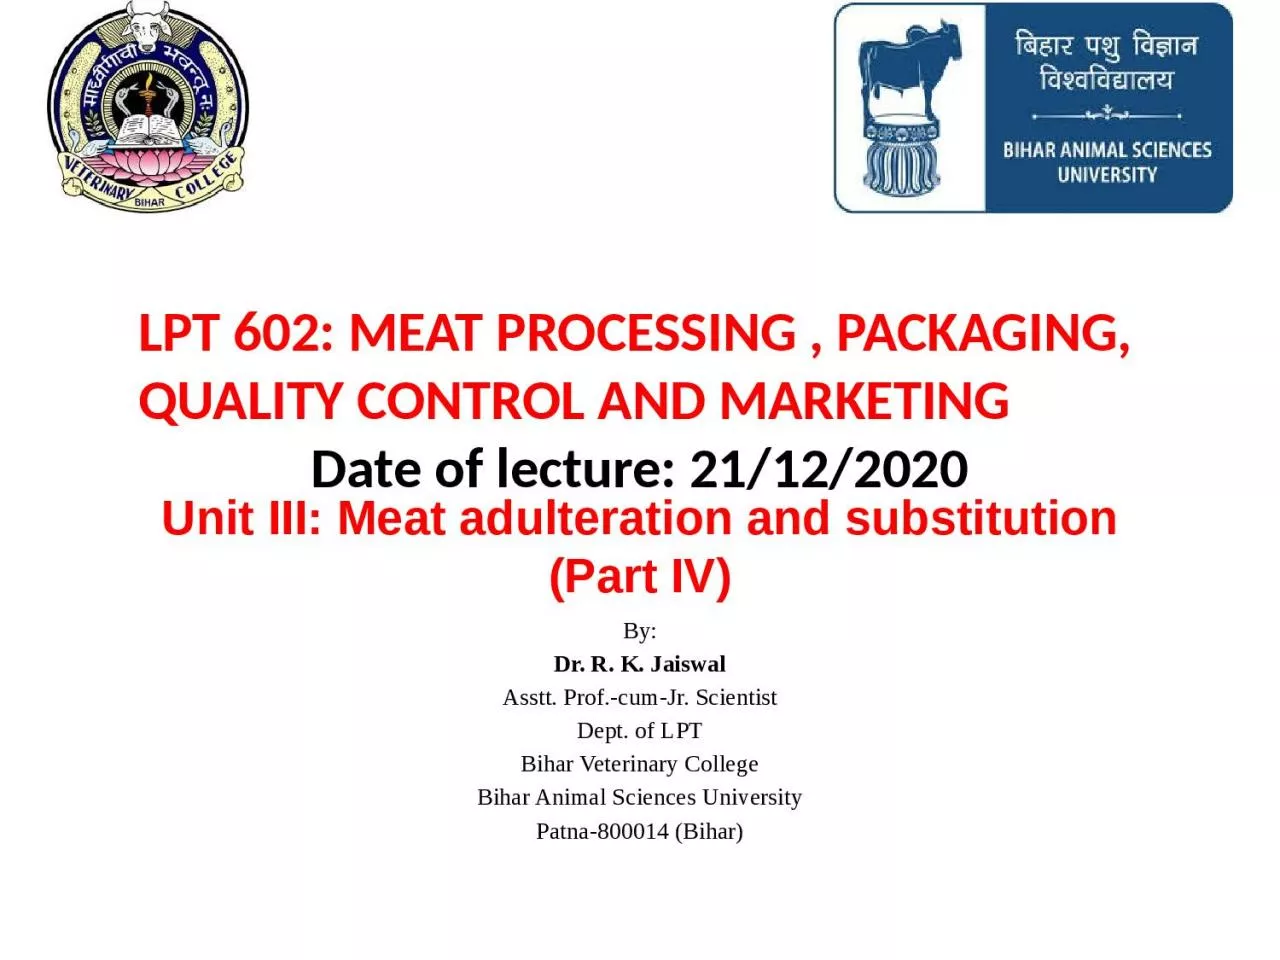 Unit III:  Meat adulteration and substitution (